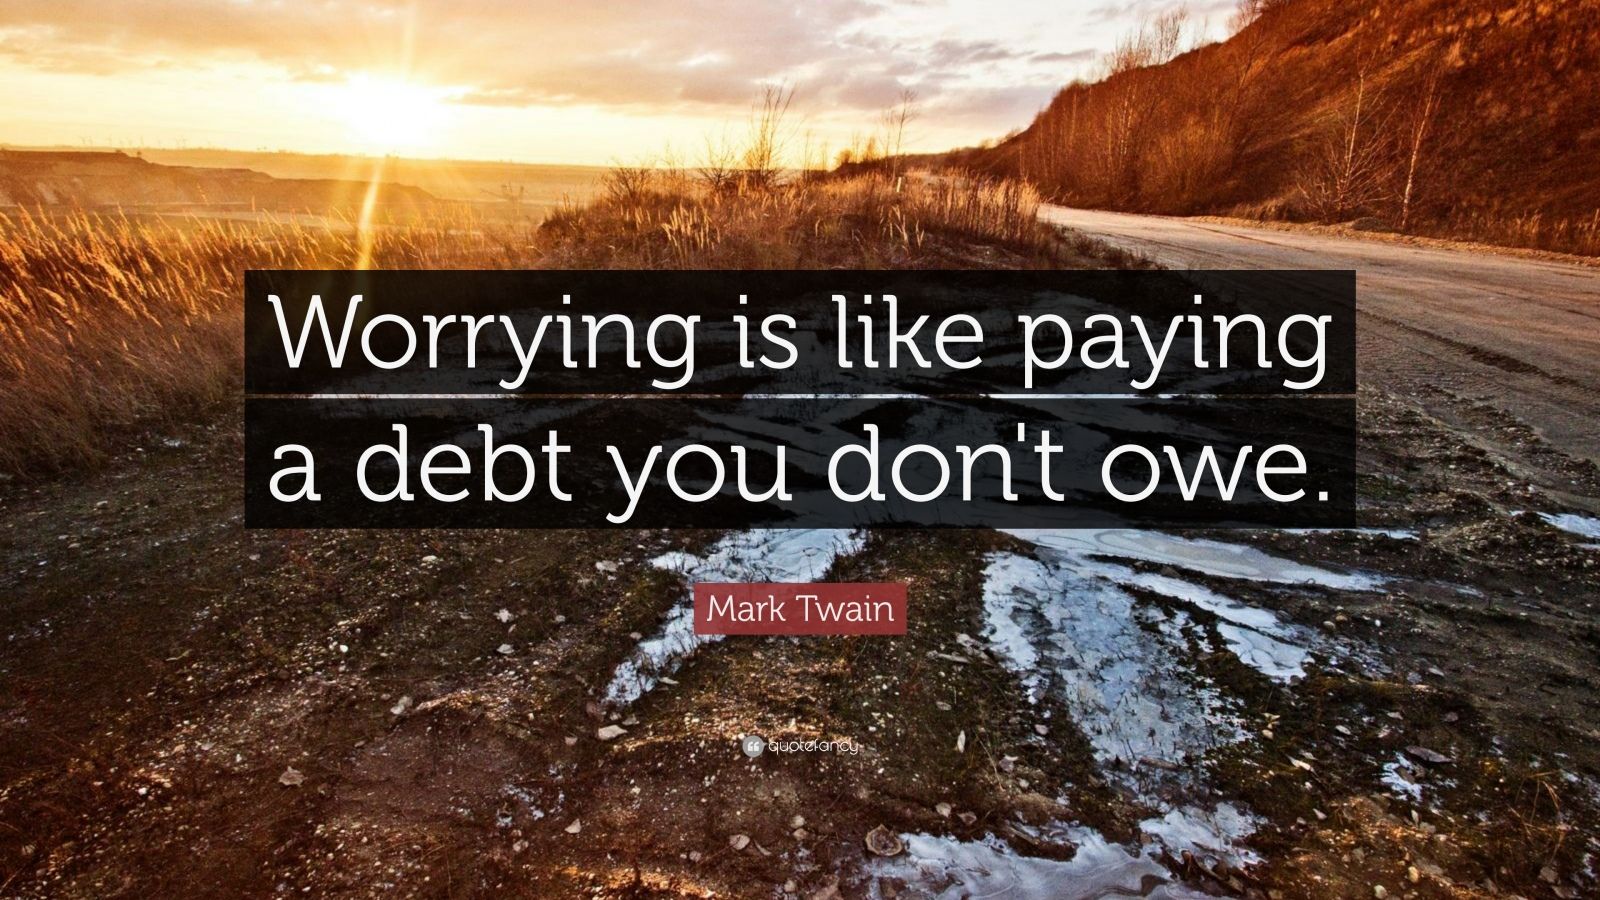 Mark Twain Quote: “Worrying is like paying a debt you don't owe.” (18 ...